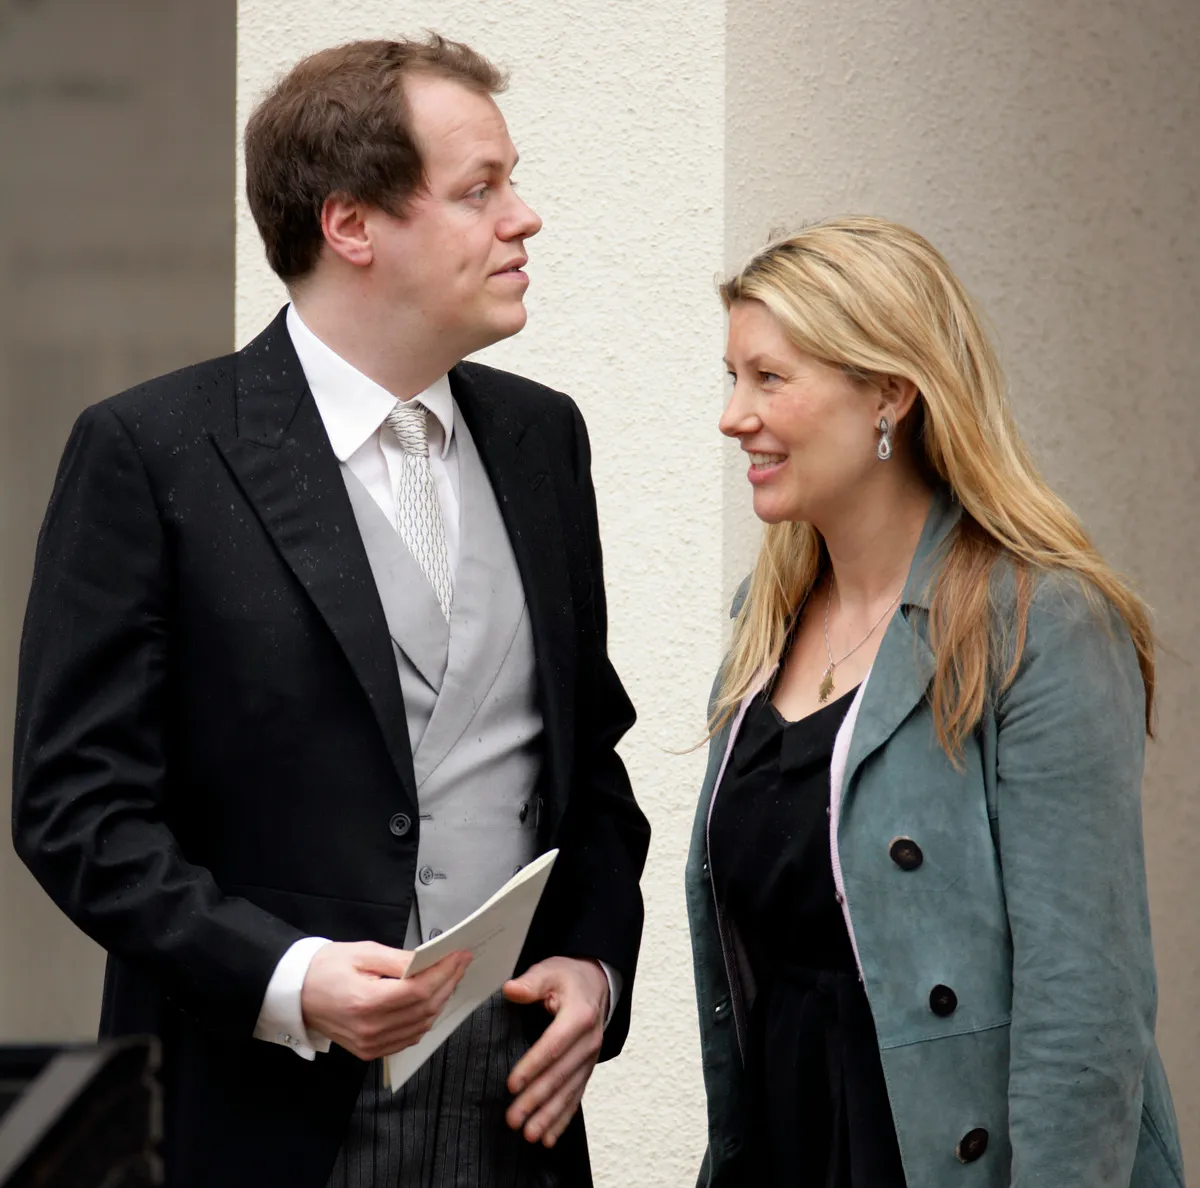 Tom Parker Bowles and wife Sara Parker Bowles (formerly Buys) attend a memorial service for Rosemary Parker Bowles at the Guards Chapel, Wellington Barracks on March 25, 2010 in London, England.